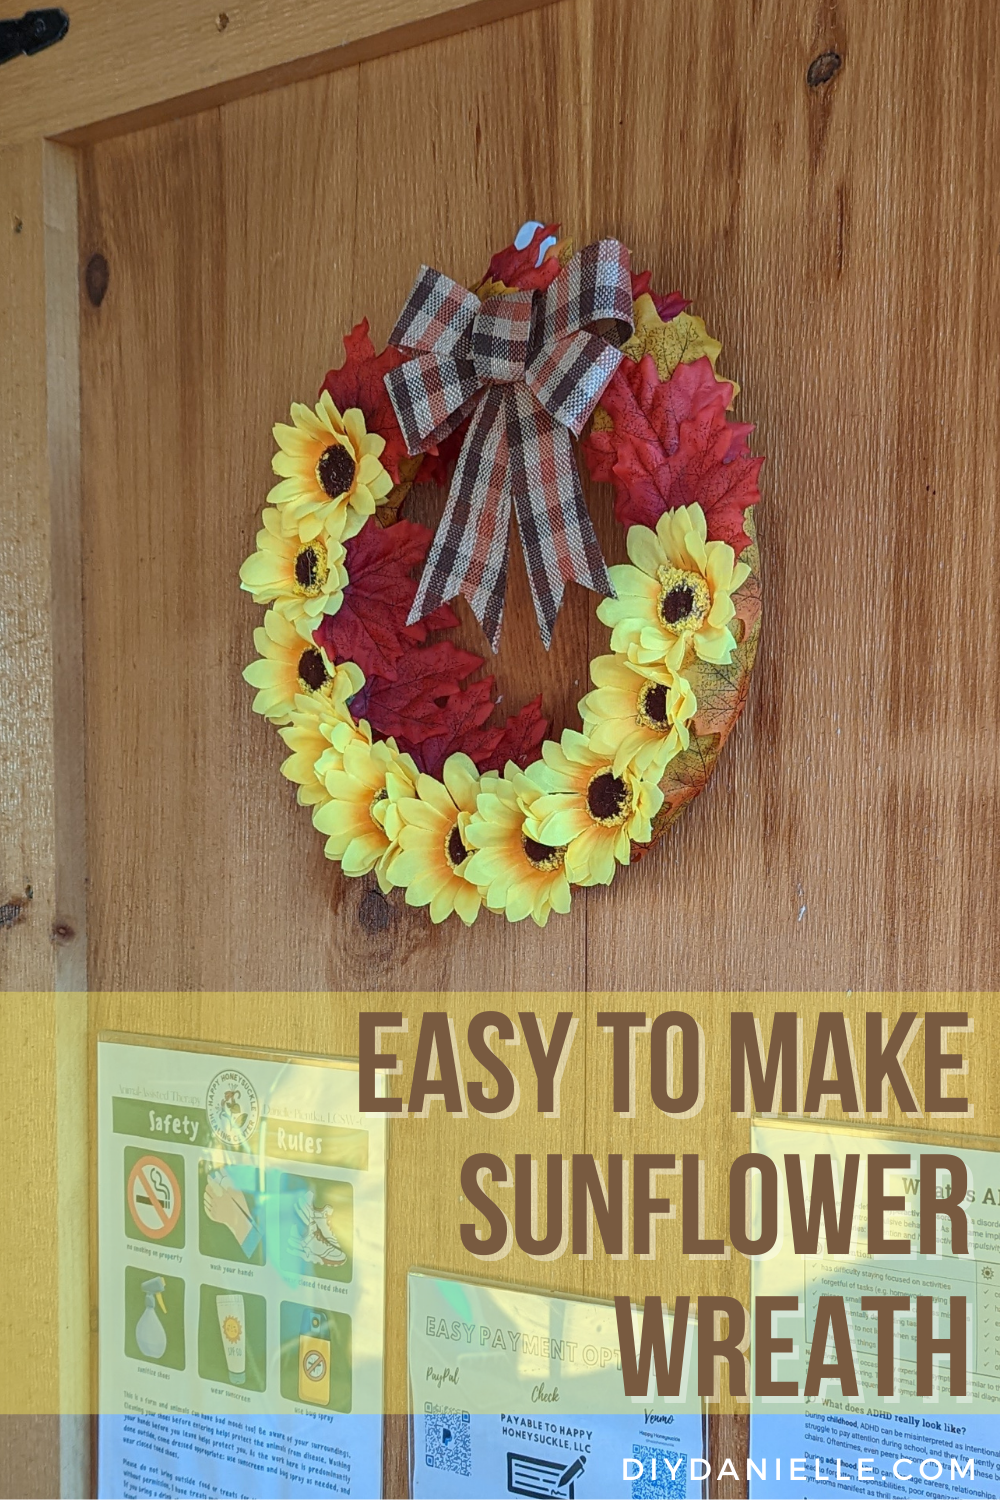 Easy to make sunflower wreath for my office door. This uses artificial sunflowers and Fall leaves.